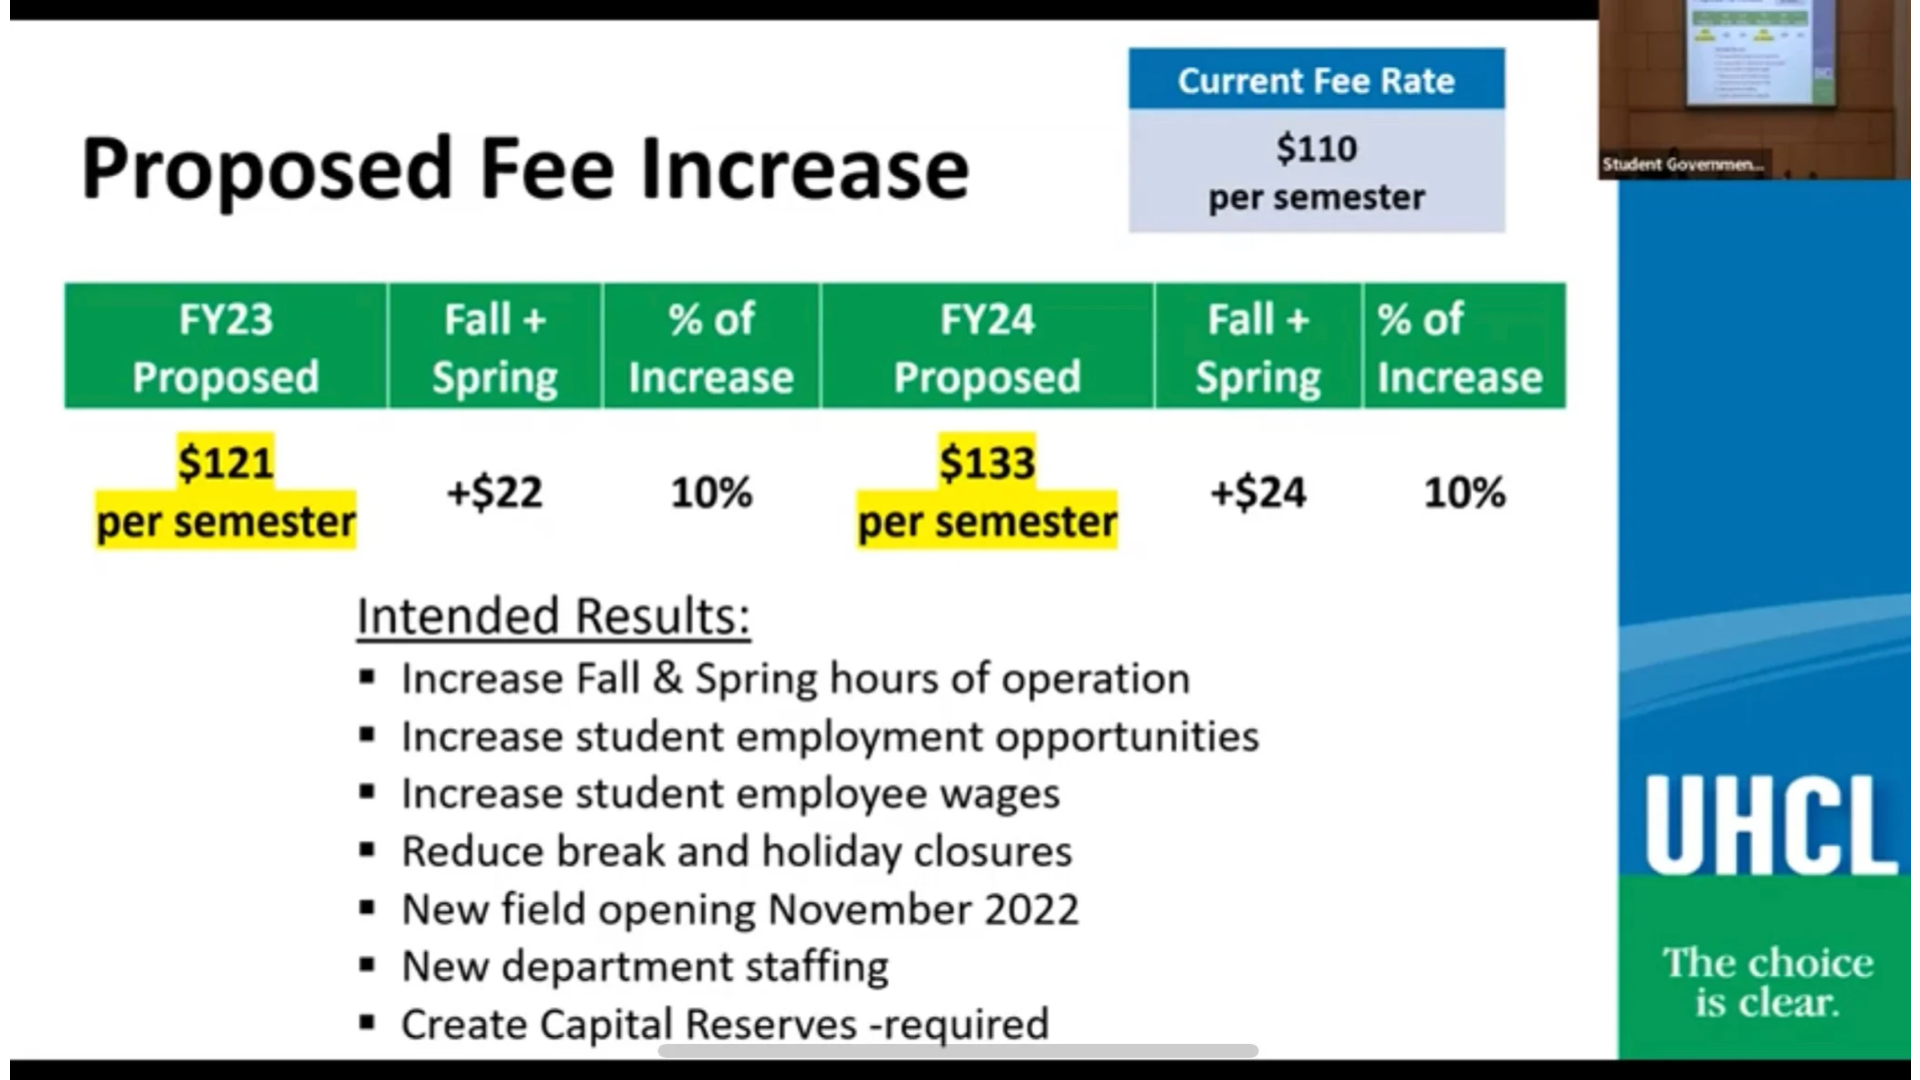 PHOTO: Image shows screenshot of power point slide proposing a fee increase for UHCL’s Campus Recreation & Wellness Center. The slide is titled “Proposed Fee Increase.” It list the current Fee Rate as $110 per semester. It lists the proposed FY23 amount as $121 per semester. It lists the FY24 amount as $133 per semester. It lists the “Intended Results” of the proposed fee increase at the following: increase Fall & Spring hours of operation, increase student employment opportunities, increase student employee wages, reduce break and holiday closures, new field opening November 2022, new department staffing and create capital reserves which is required by law. Photo courtesy of Brian Mills and the Student Government Association.